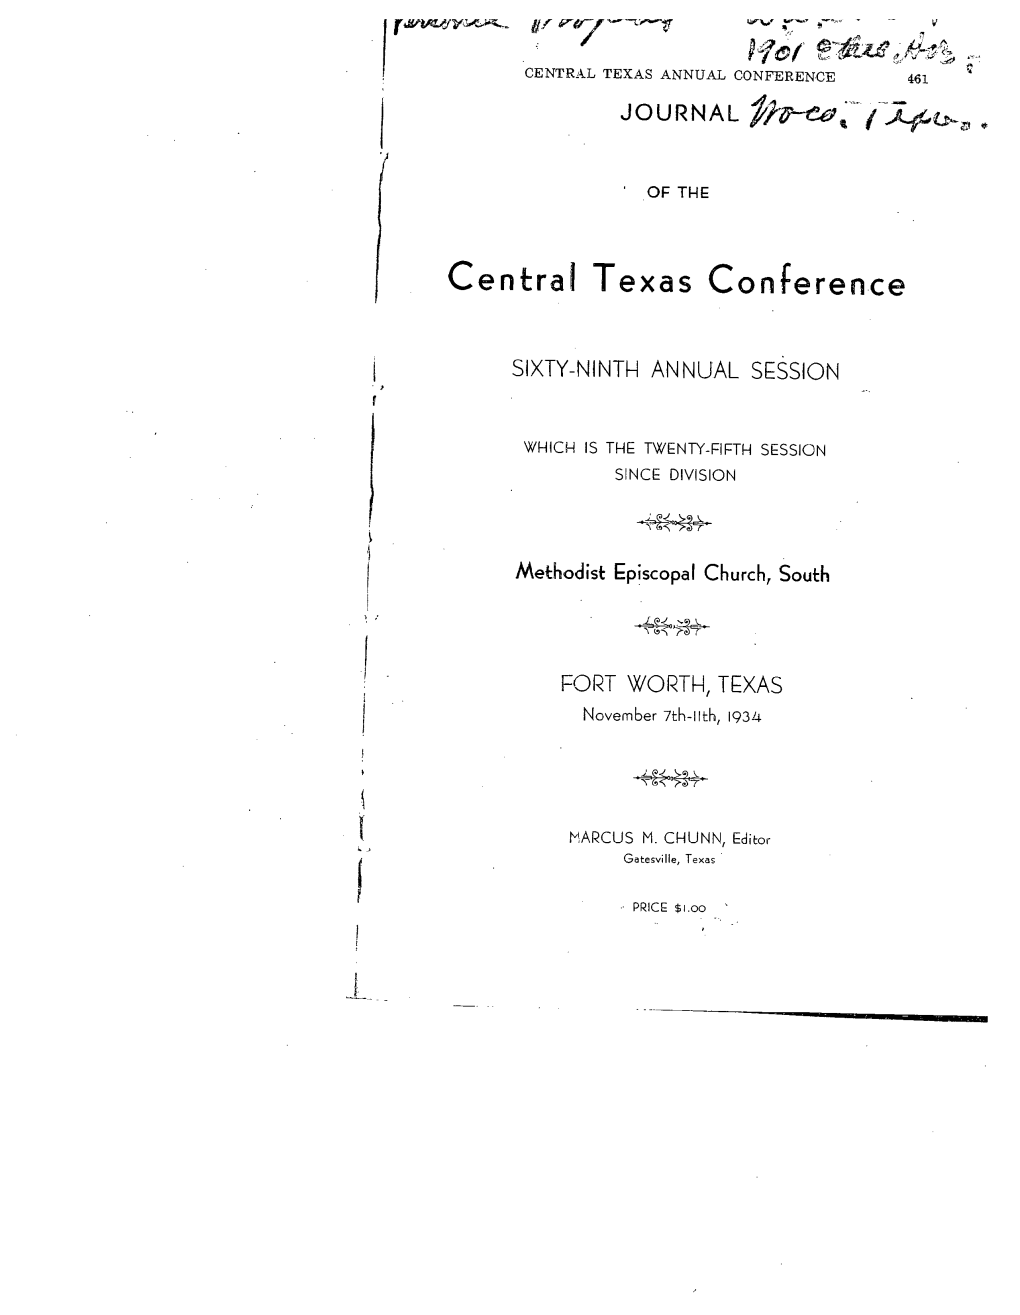 Central Texas Conference